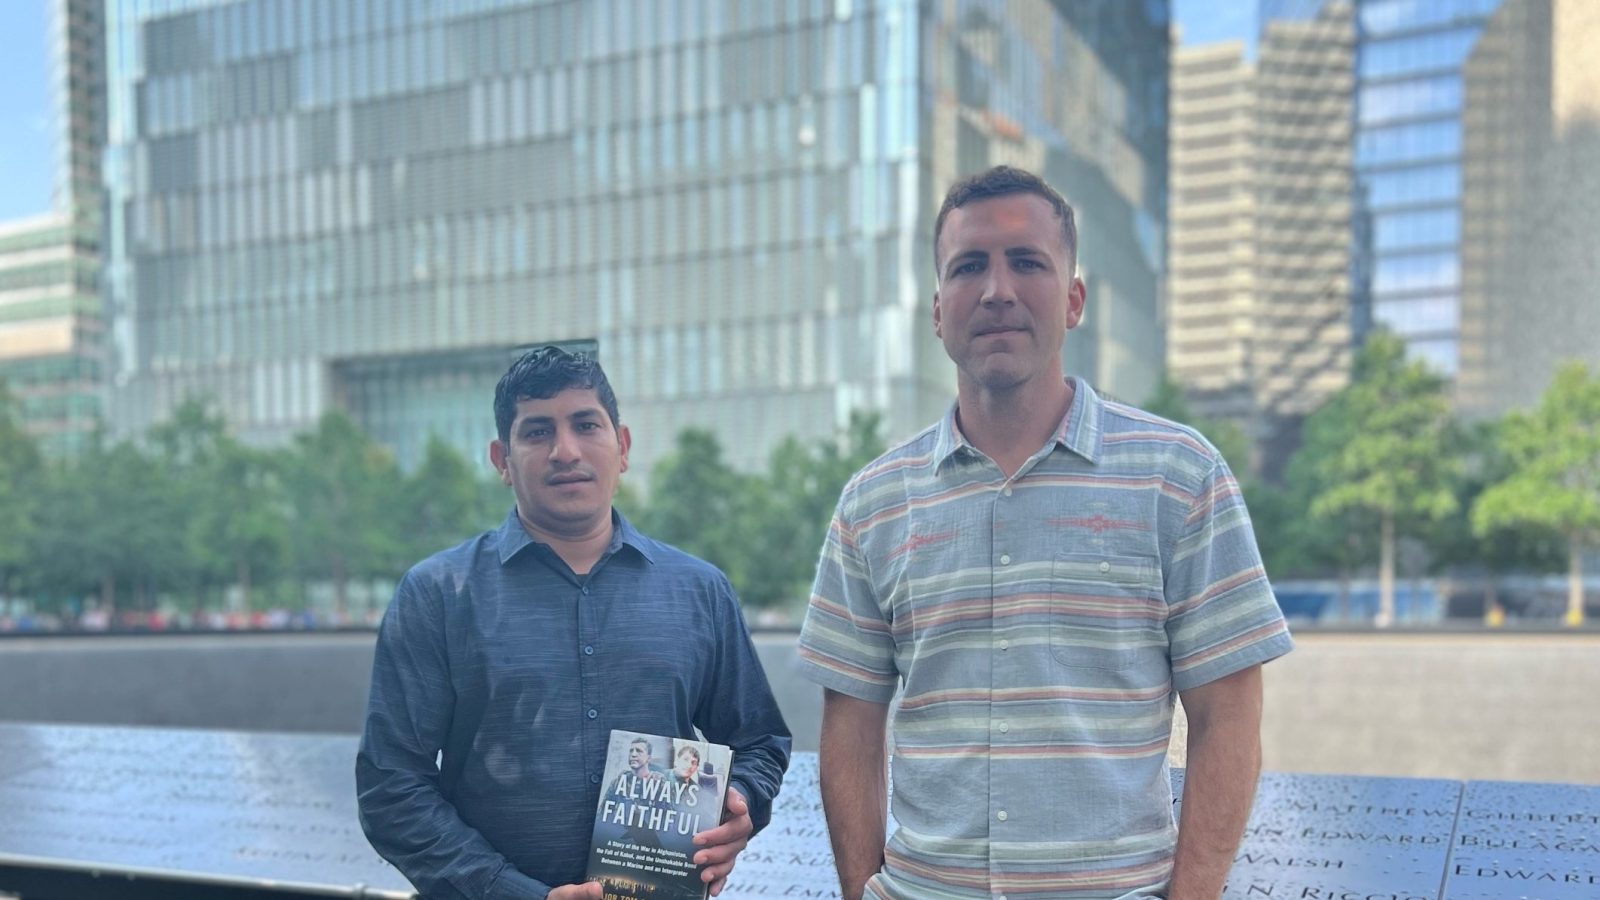 Two men stand next to each other in front of blue river and skyscrapers. The man on the left holds a book and is wearing a blue long-sleeved shirt and khakis. The man on the right wears a short-sleeve button-down and jeans.